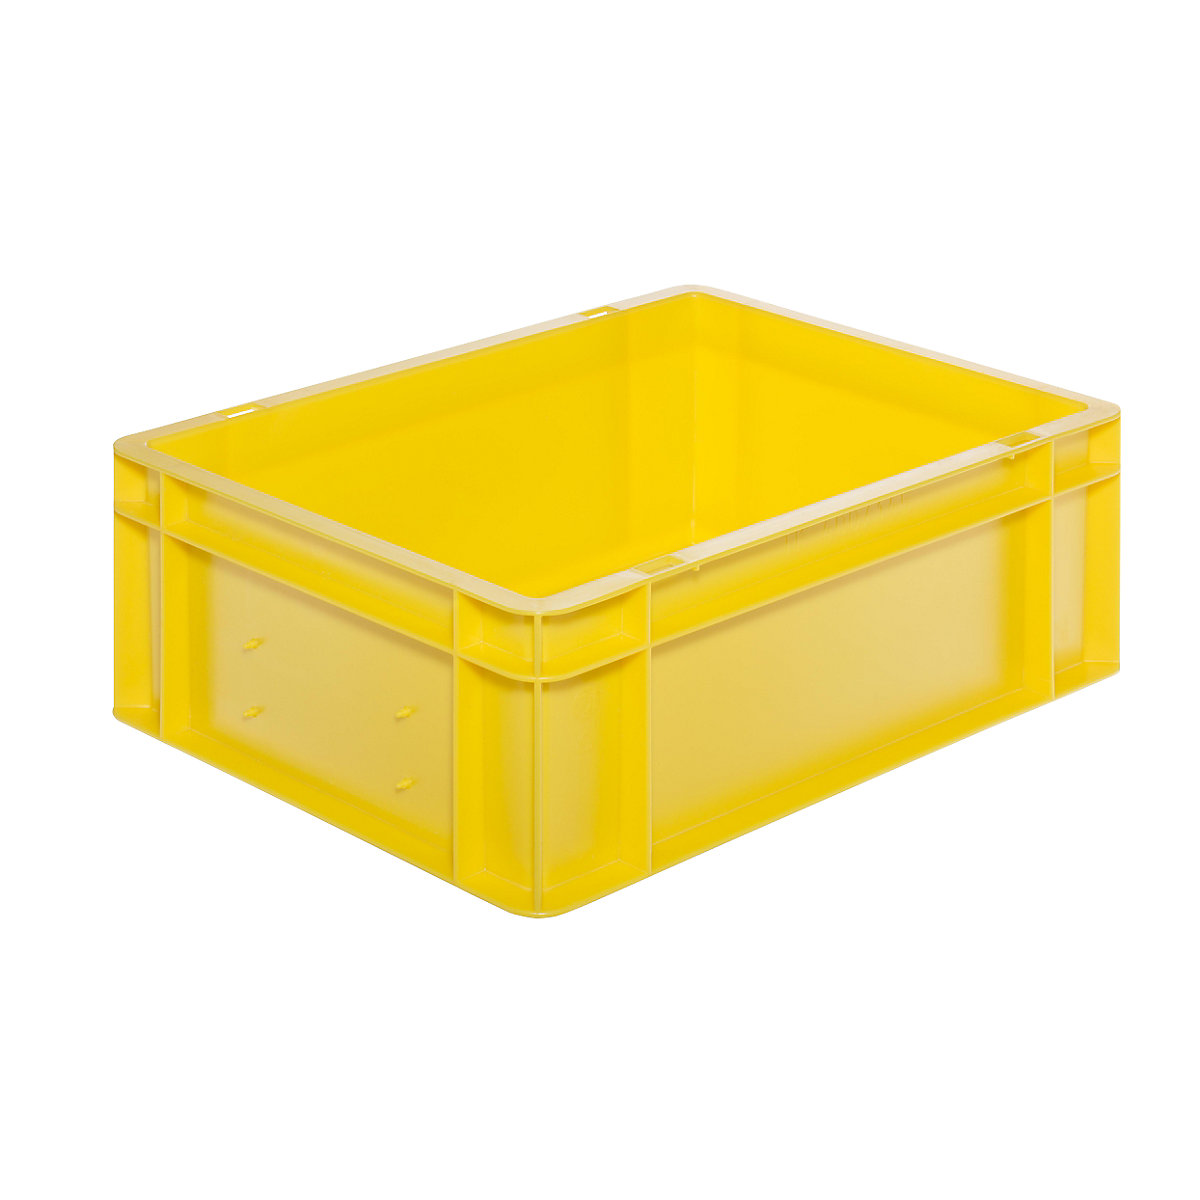 Euro stacking container, closed walls and base, LxWxH 400 x 300 x 145 mm, yellow, pack of 5